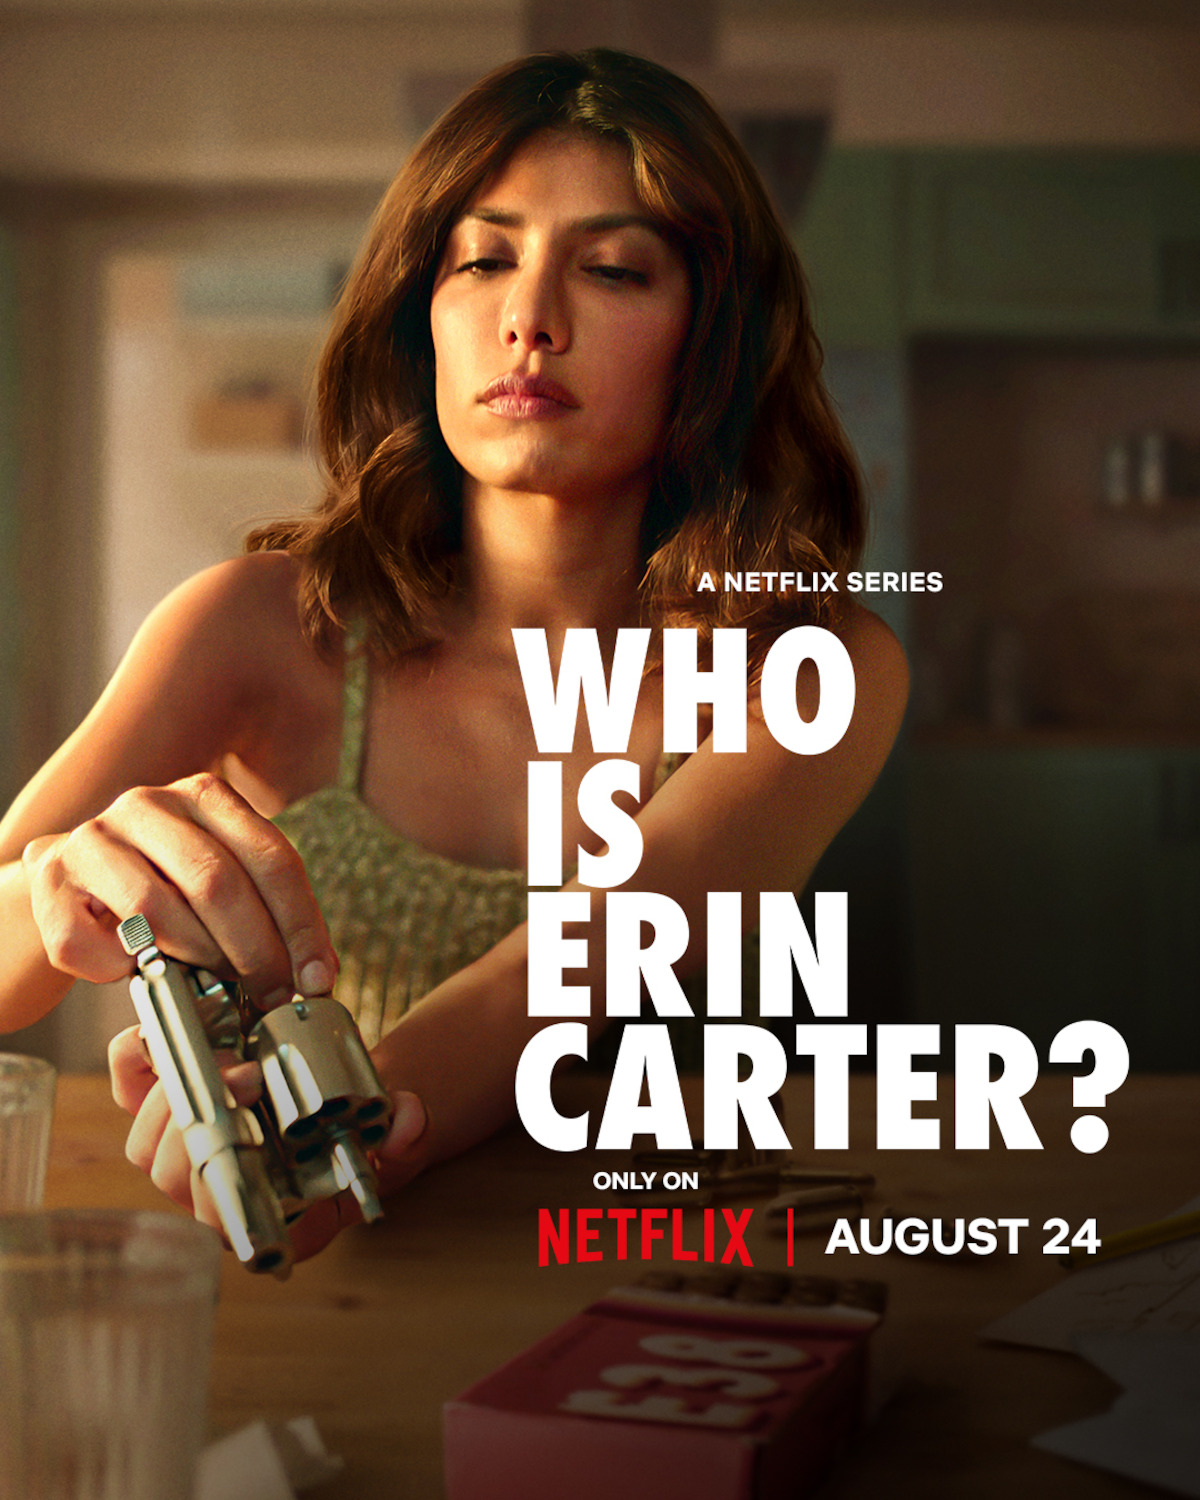 Who Is Erin Carter?: Everything You Need to Know About the